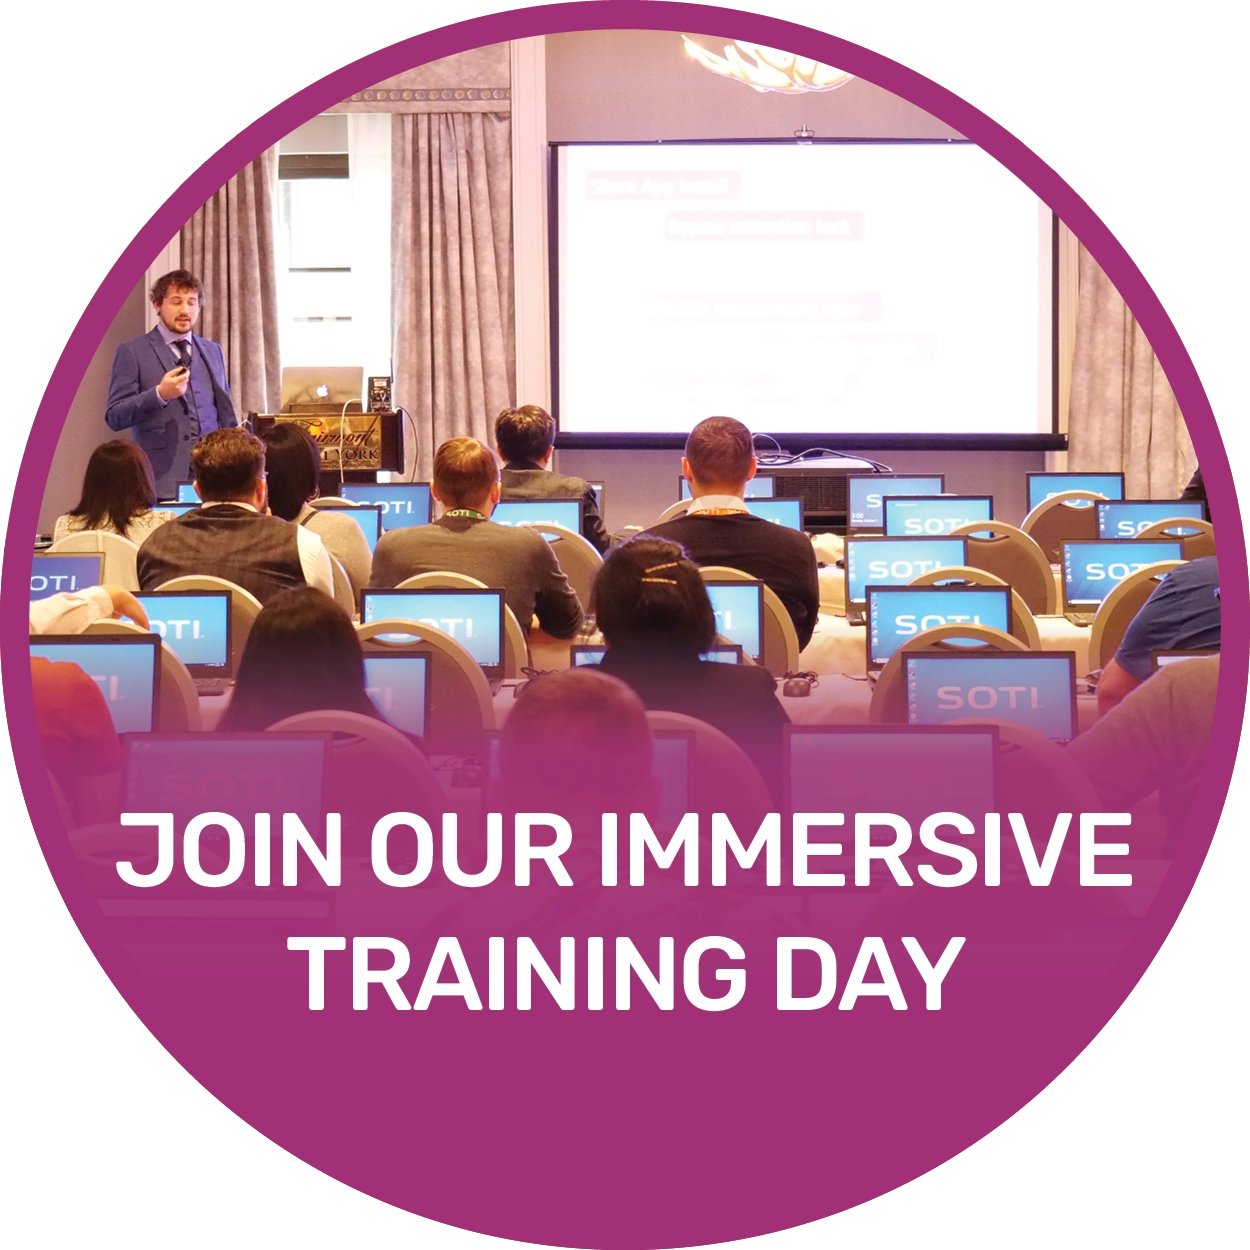 Join our immersive training day